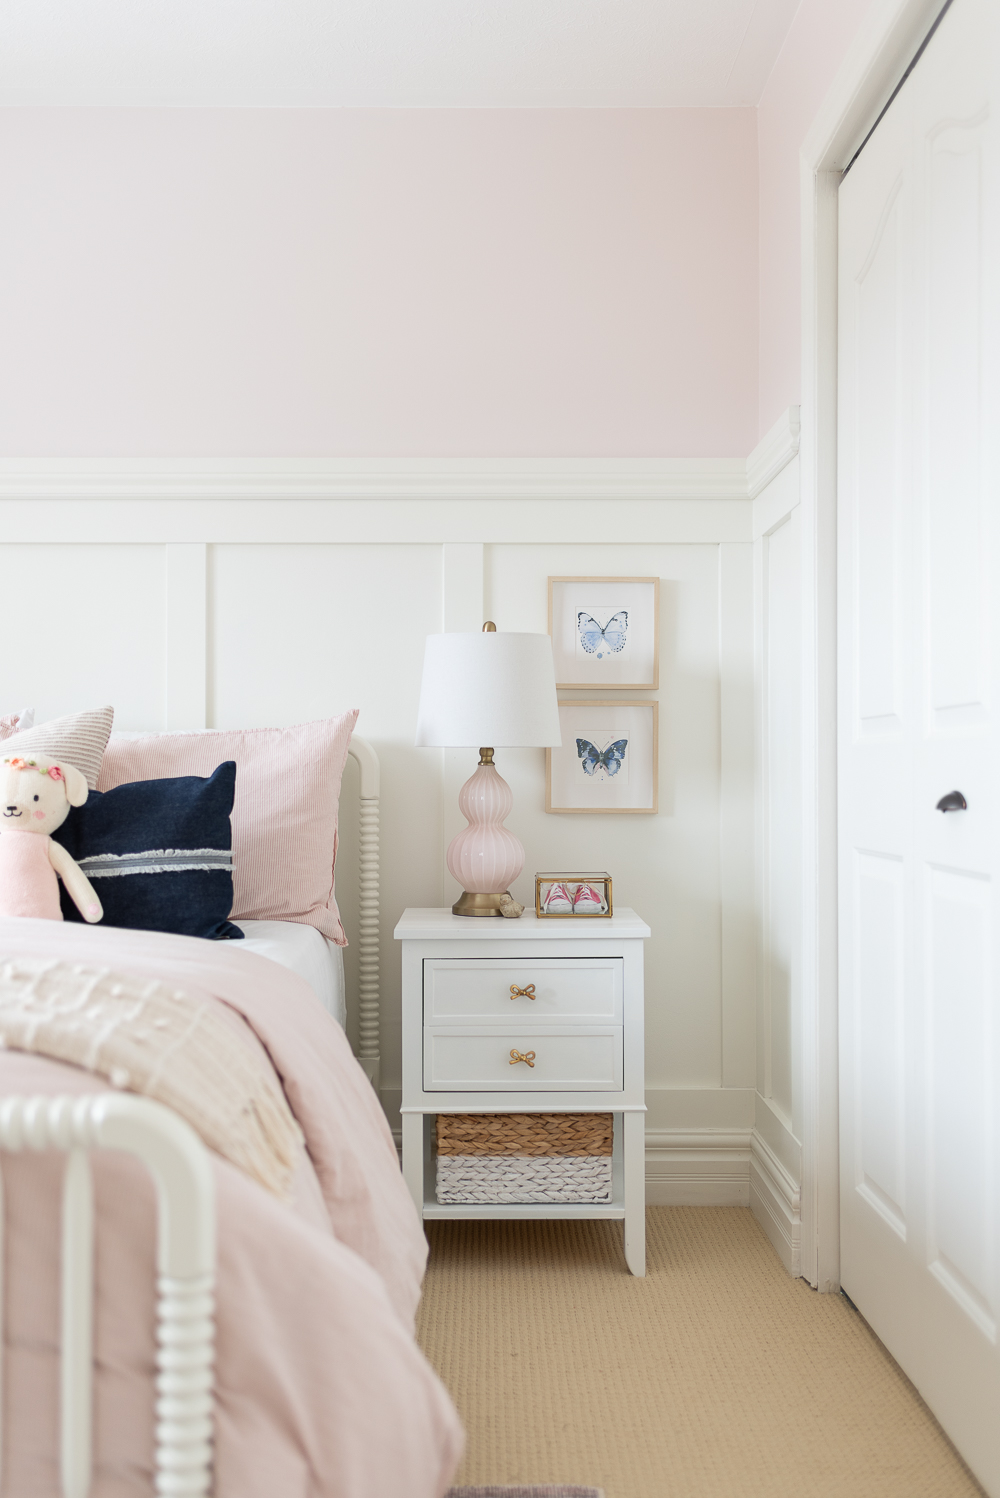 Sweet and Playful Kid's Bedroom in Shades of Pink and Blue - Nick + Alicia